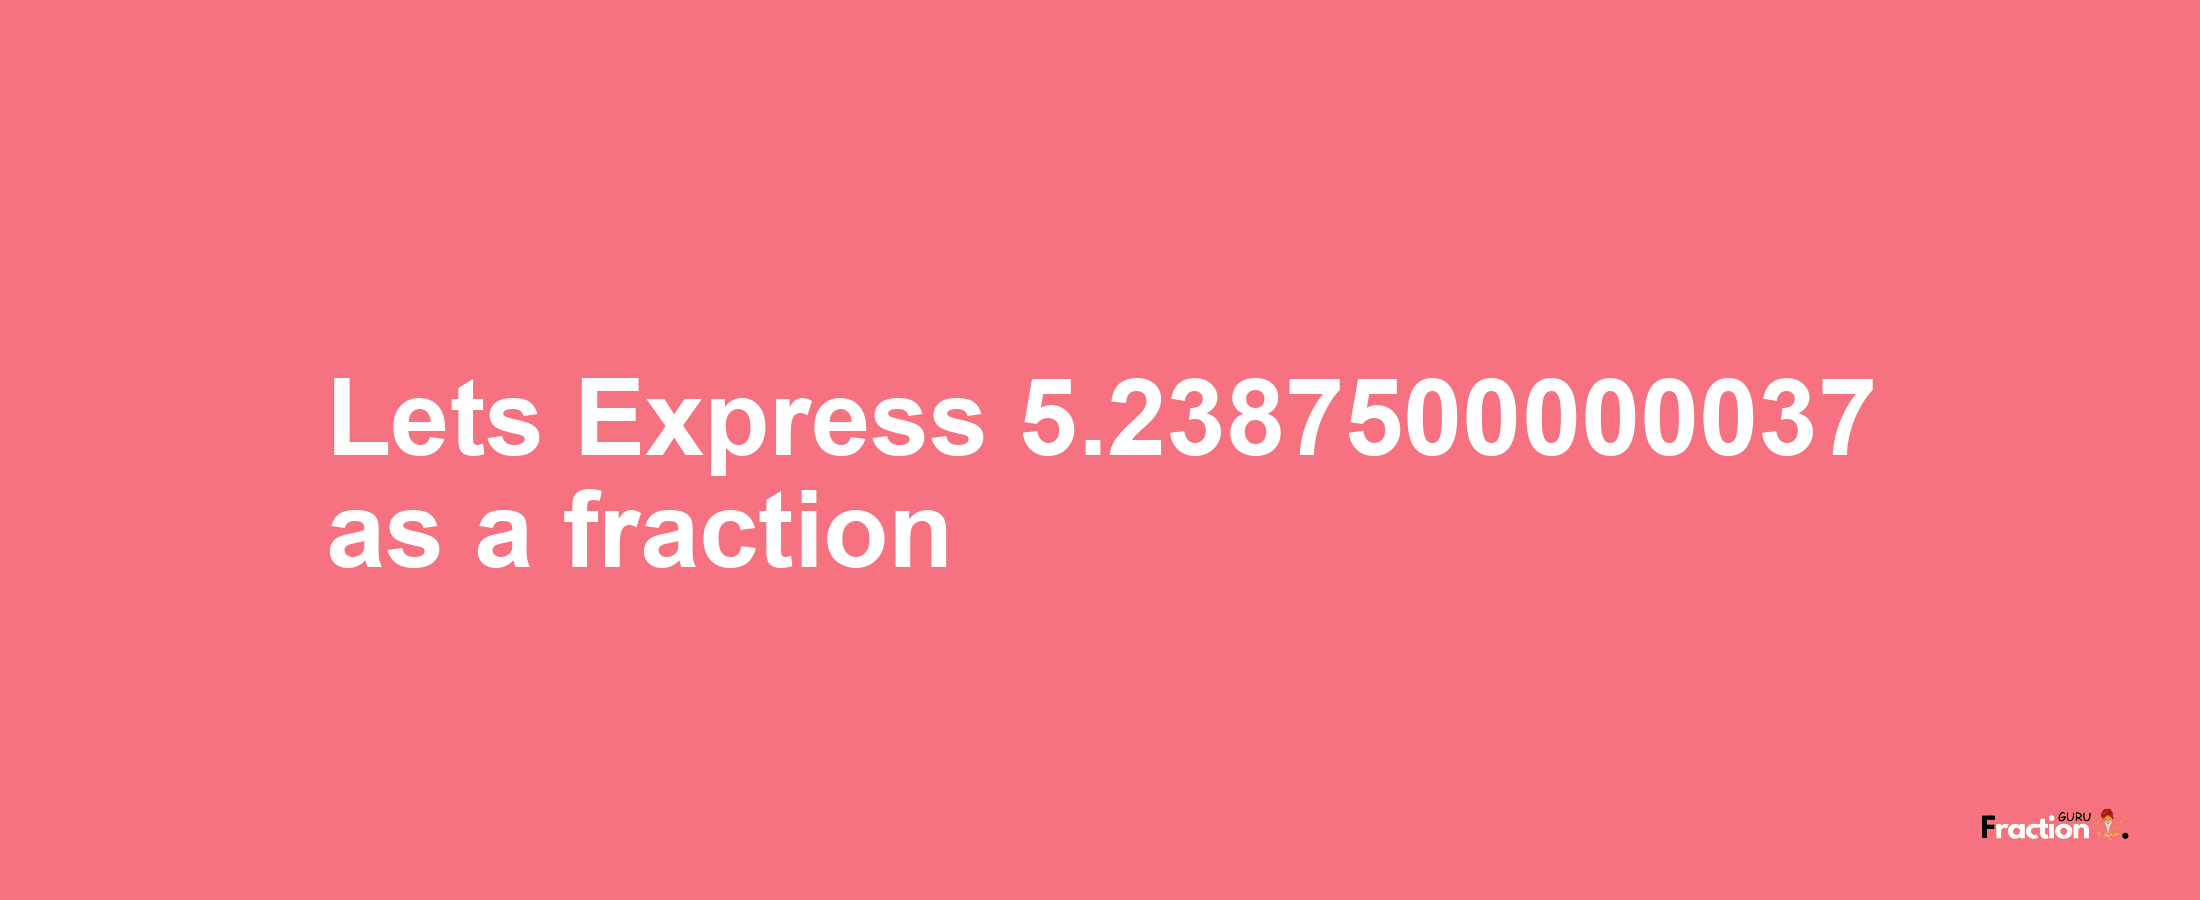 Lets Express 5.2387500000037 as afraction